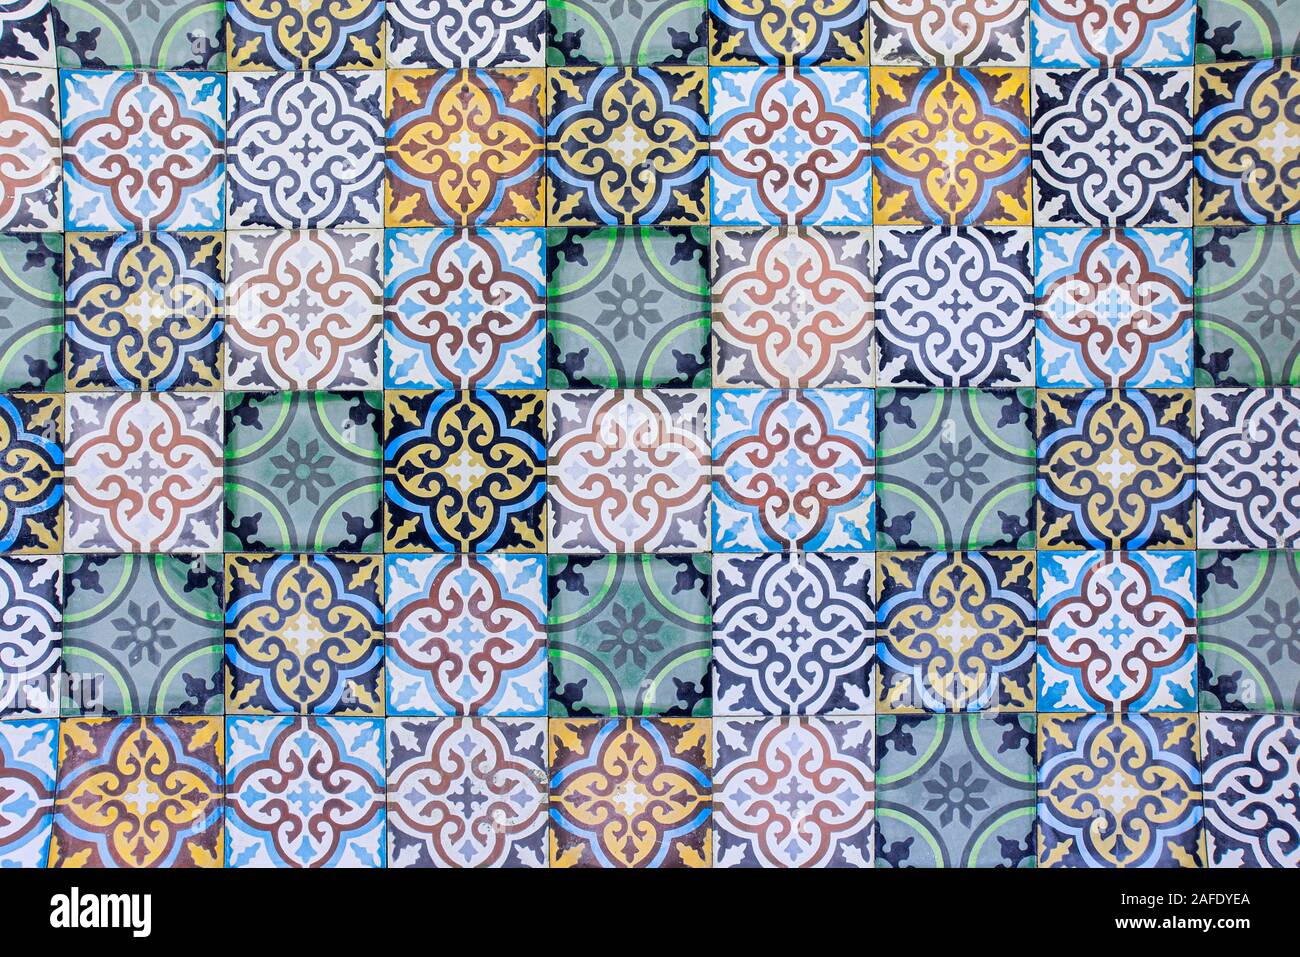 Arabic Pattern Floor High Resolution Stock Photography and Images - Alamy